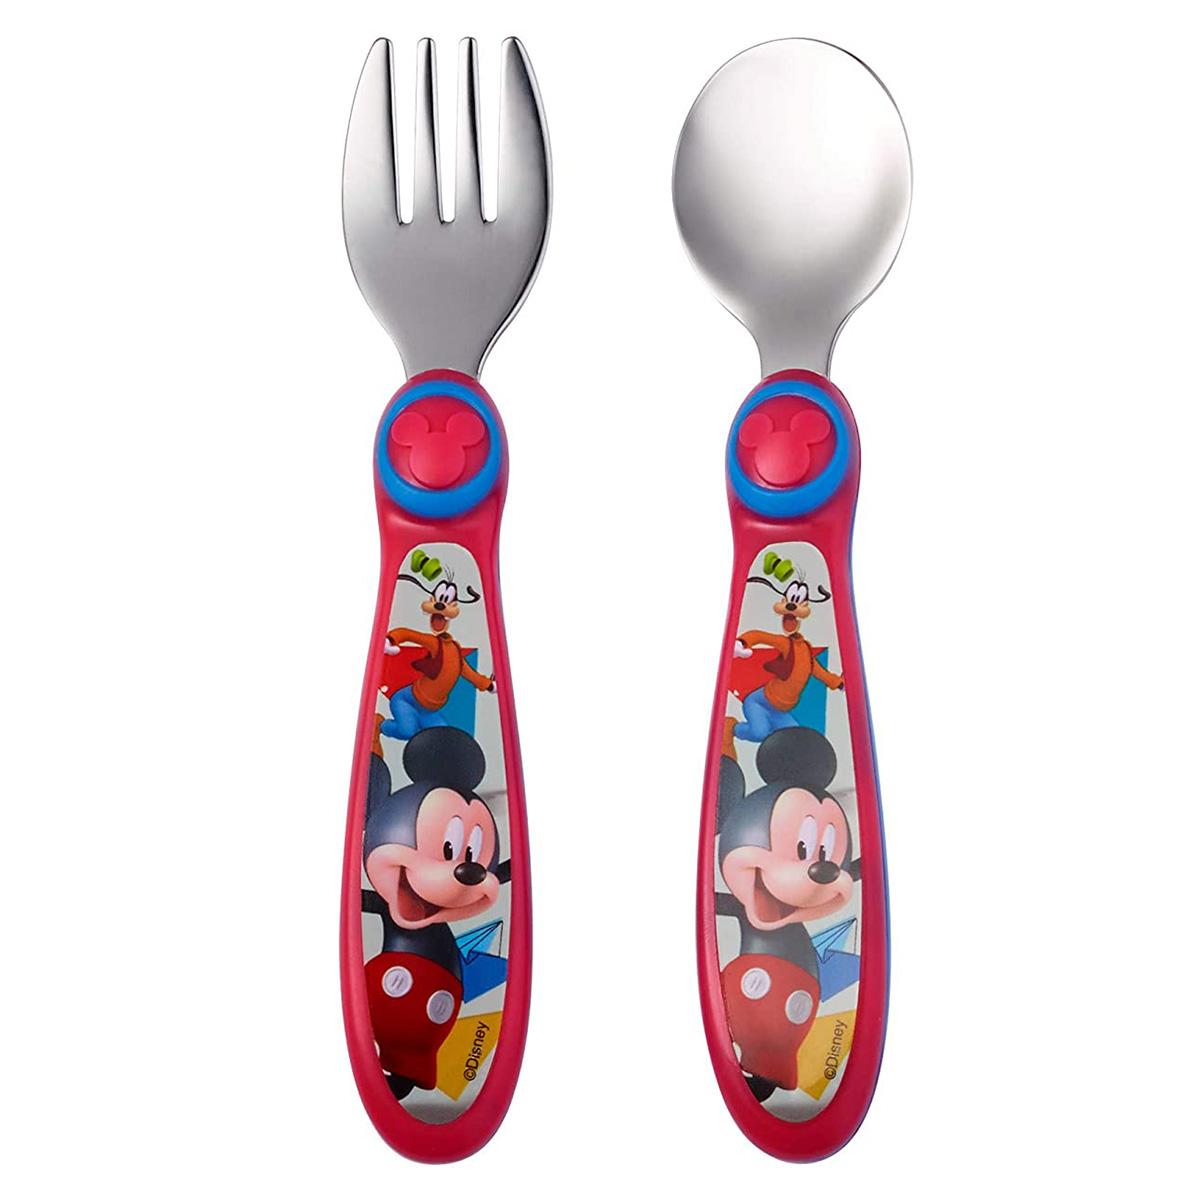 2-Piece The First Years Disney Kids Stainless Steel Flatware for $2.48